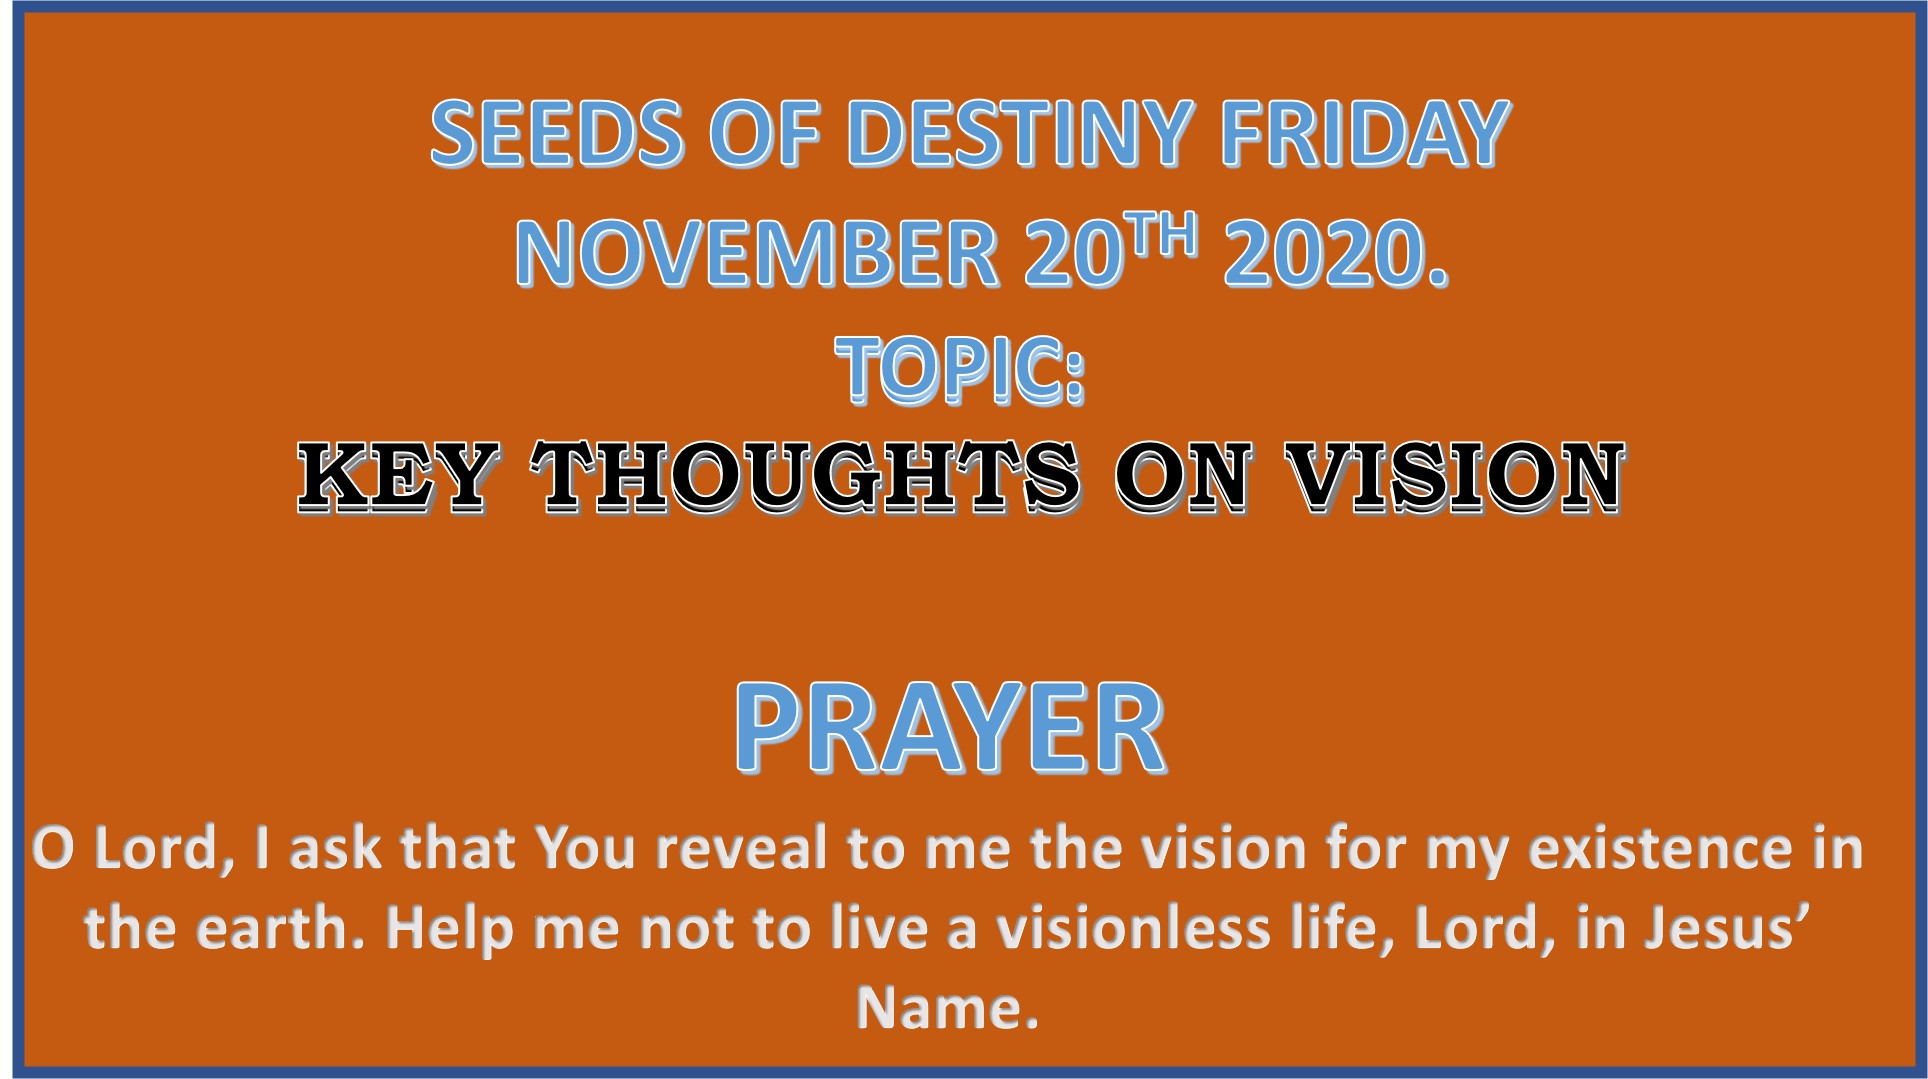 Seeds of Destiny Friday 20th November 2020 by Dr Paul Enenche